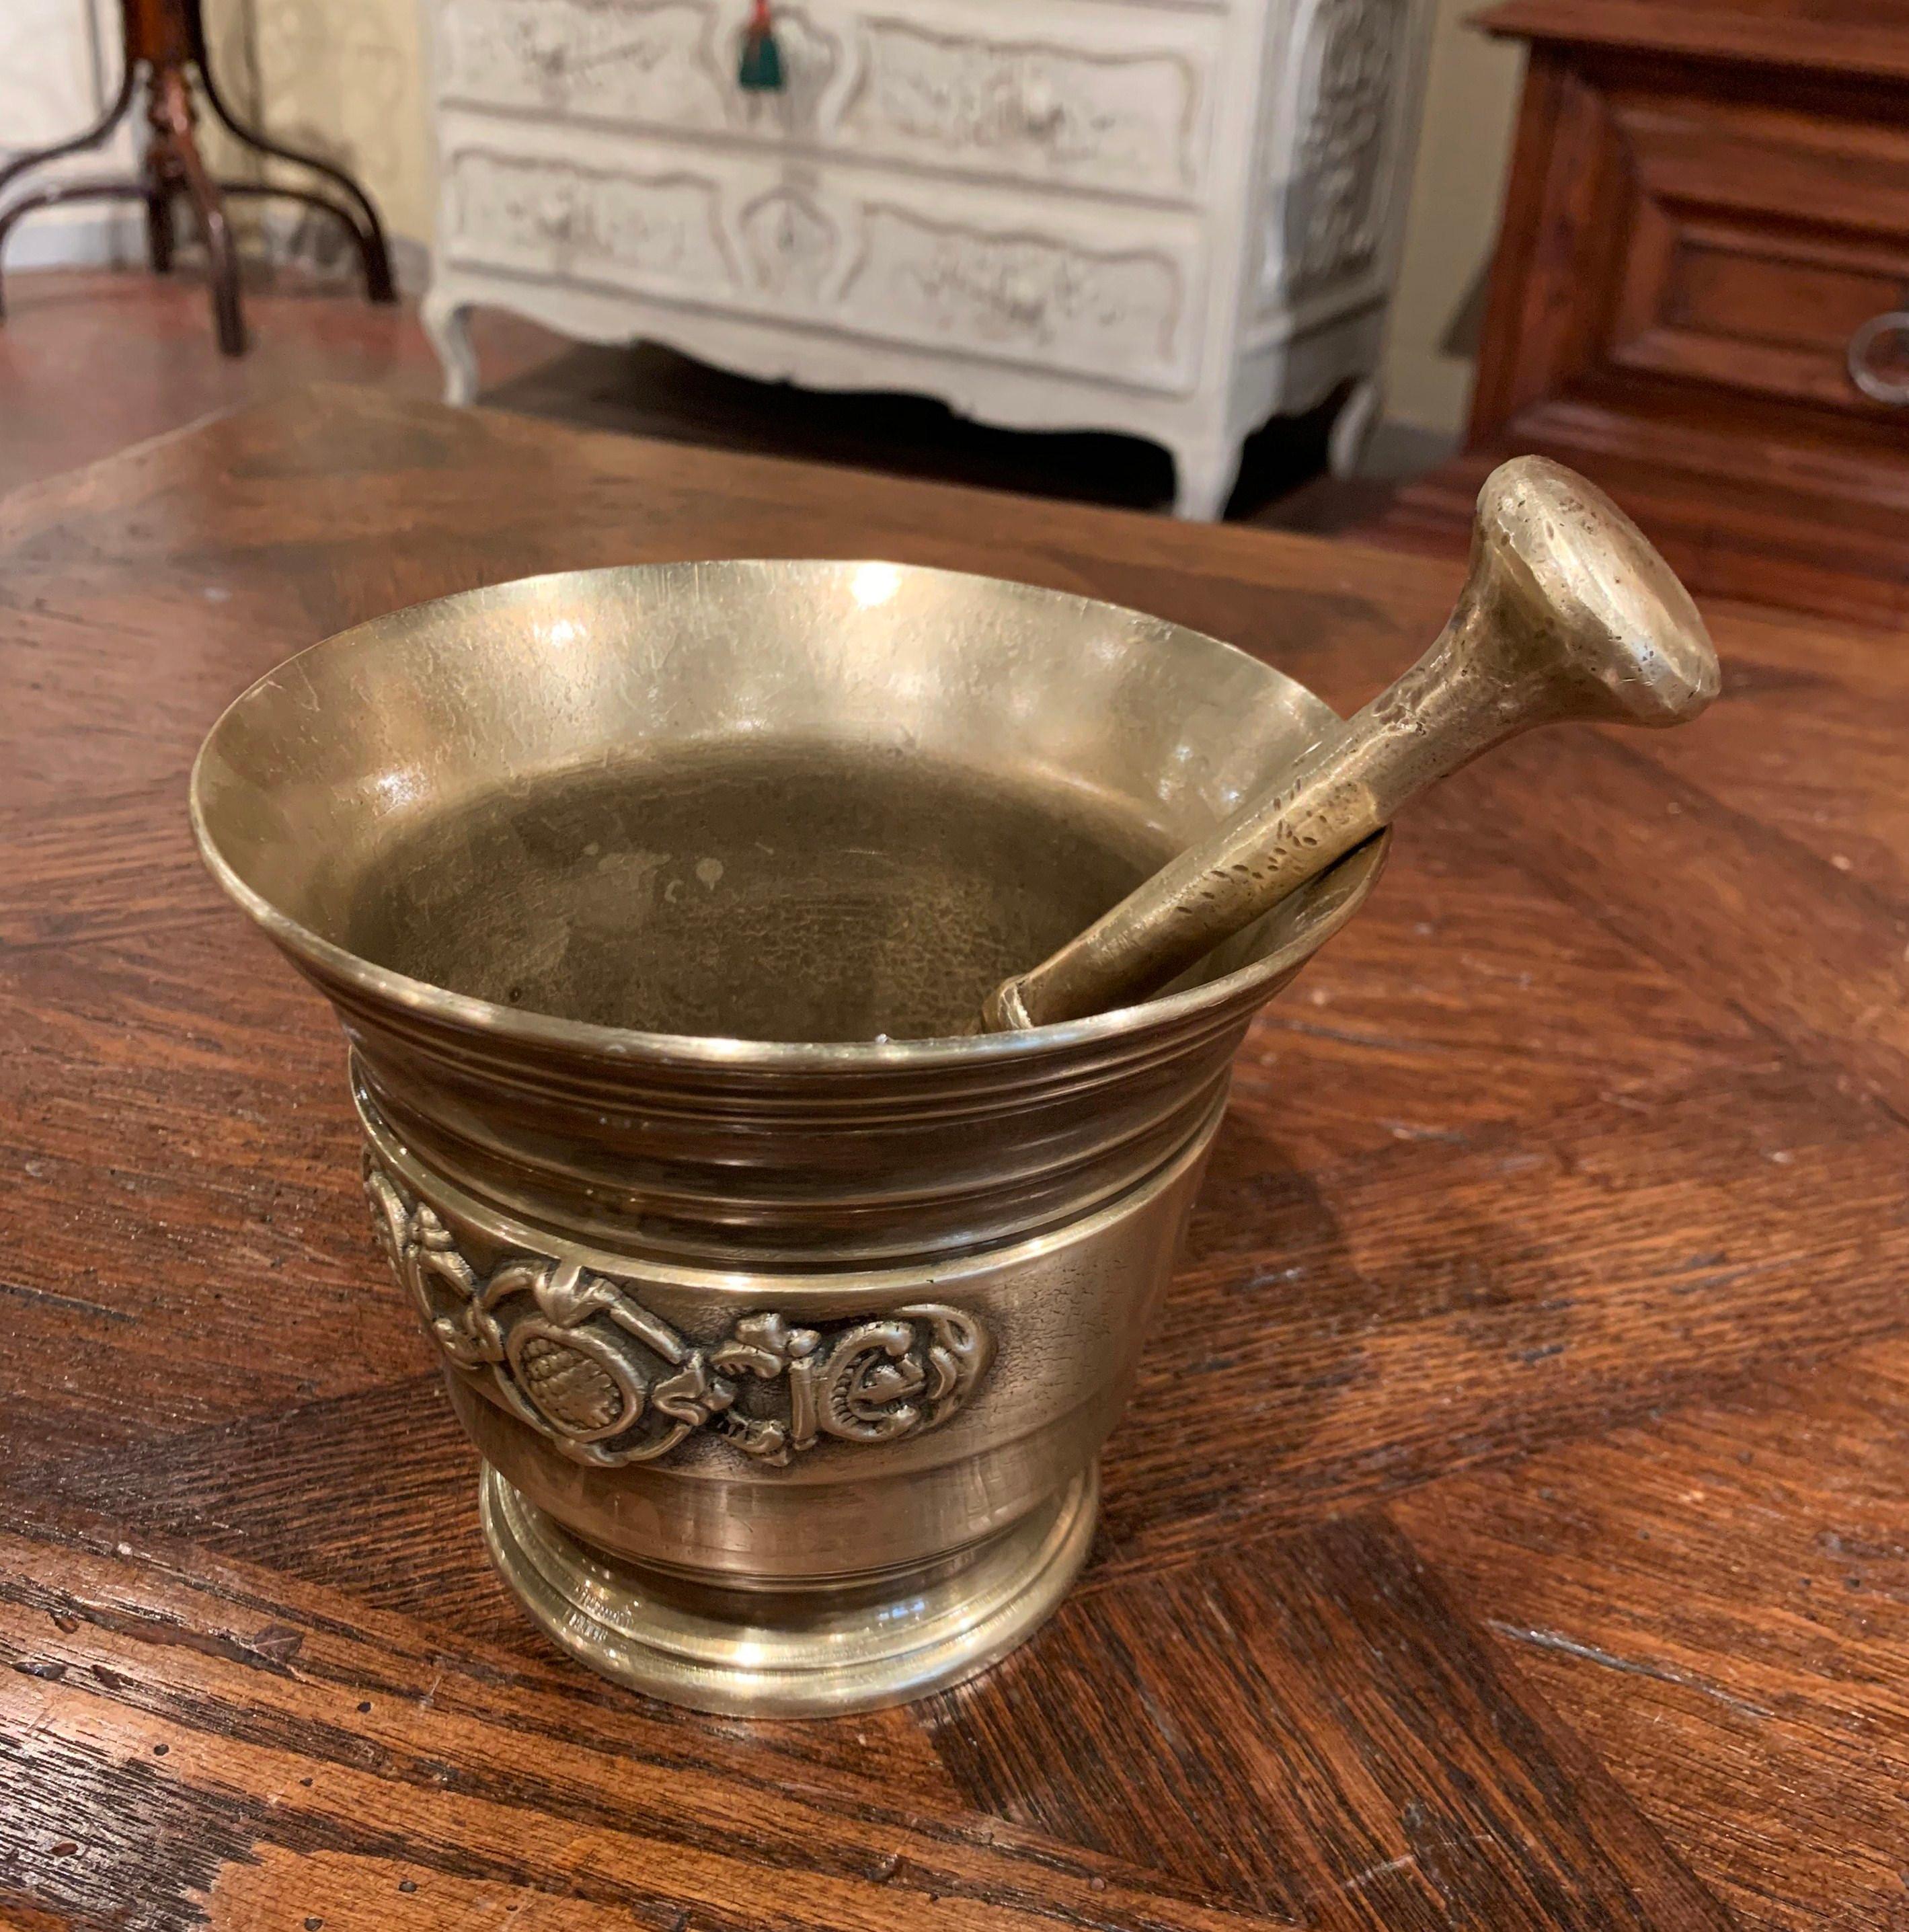 Grind spices in your kitchen with this beautifully carved, antique mortar. Crafted in France circa 1860, and made of bronze, the decorative bowl is round in shape and embellished with floral motifs in high relief. The kitchen essential is in